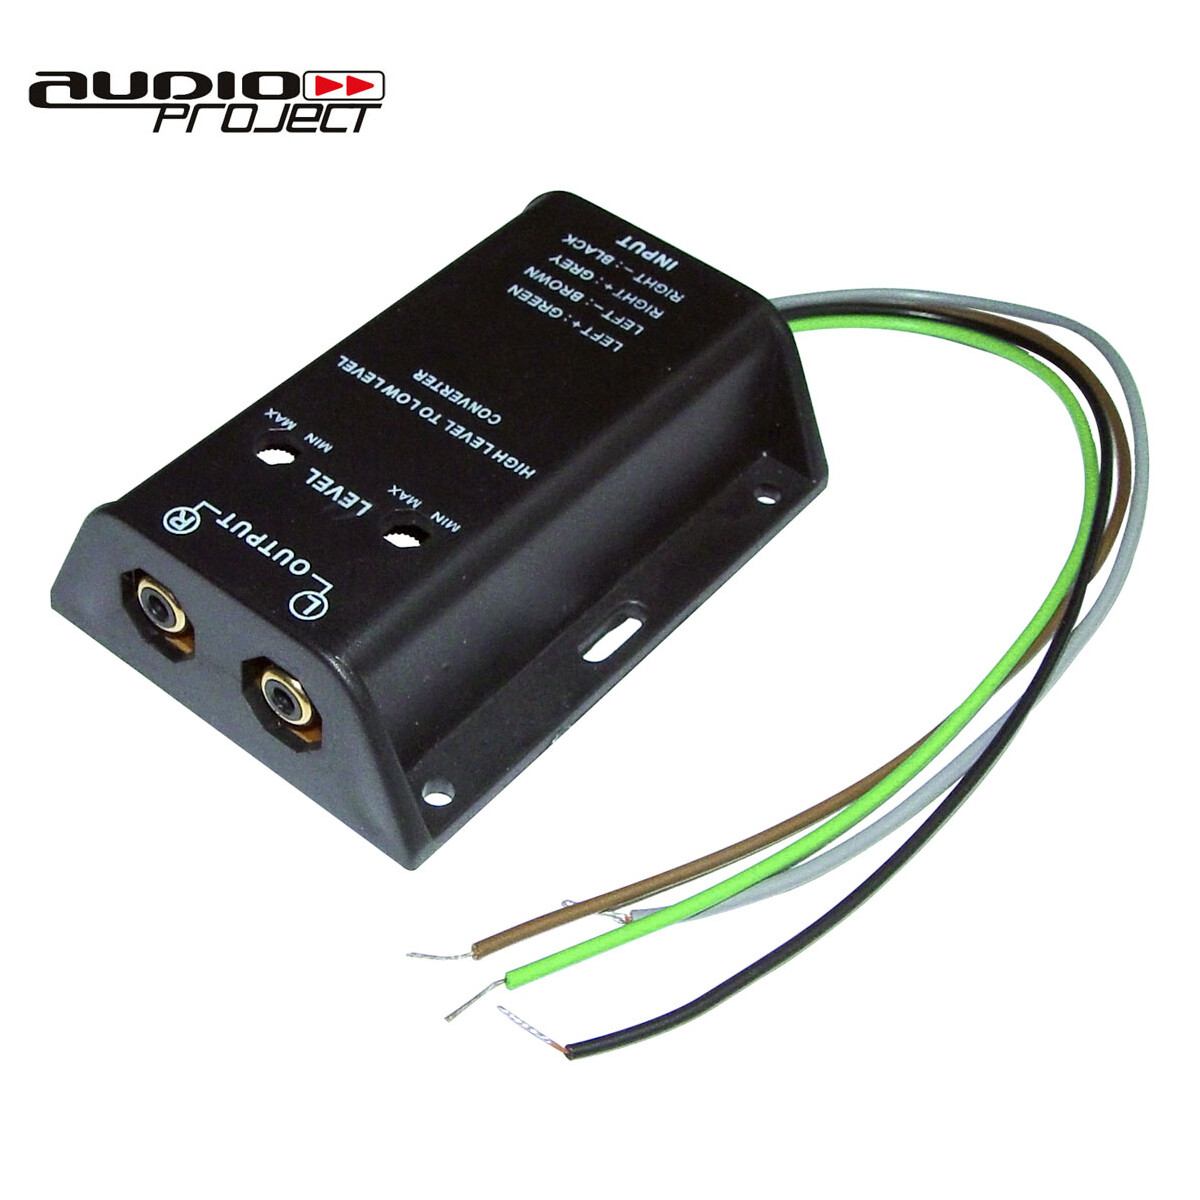 Audioproject A111 High Low Adapter Converter für Endstufe hi Level re,  11,98 €